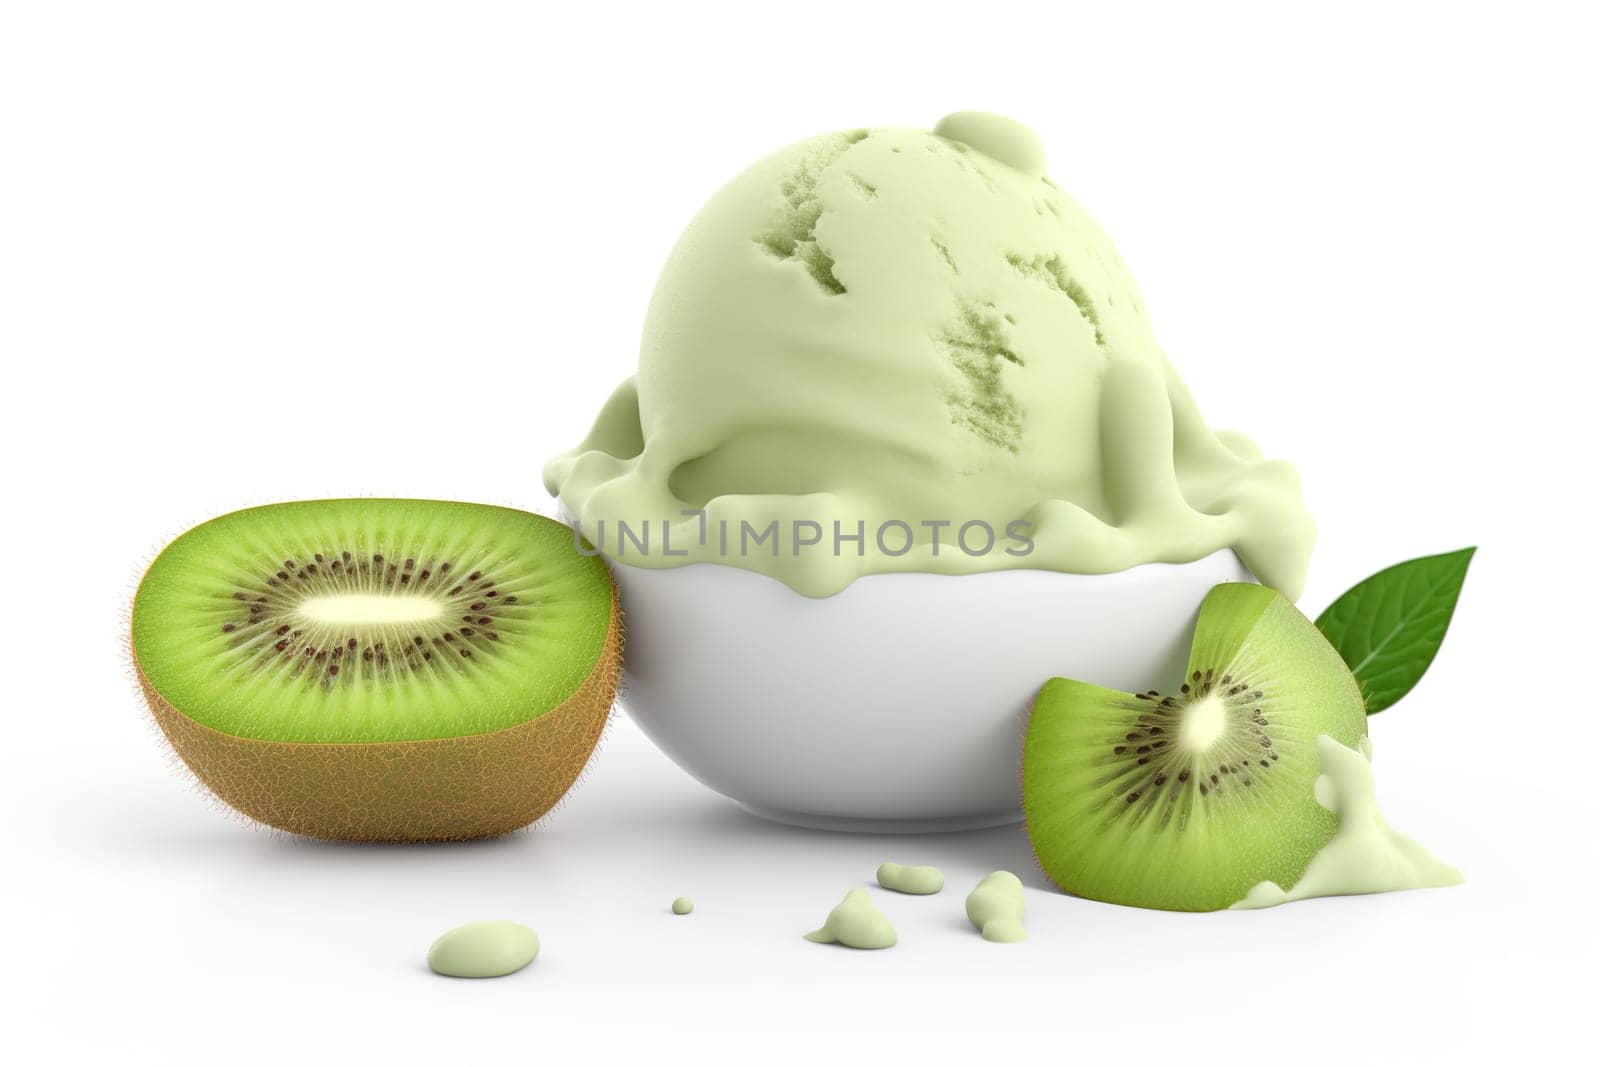 Kiwi Ice Cream Scoop With Slices Of Kiwi On A White Background, 3D Render by GekaSkr